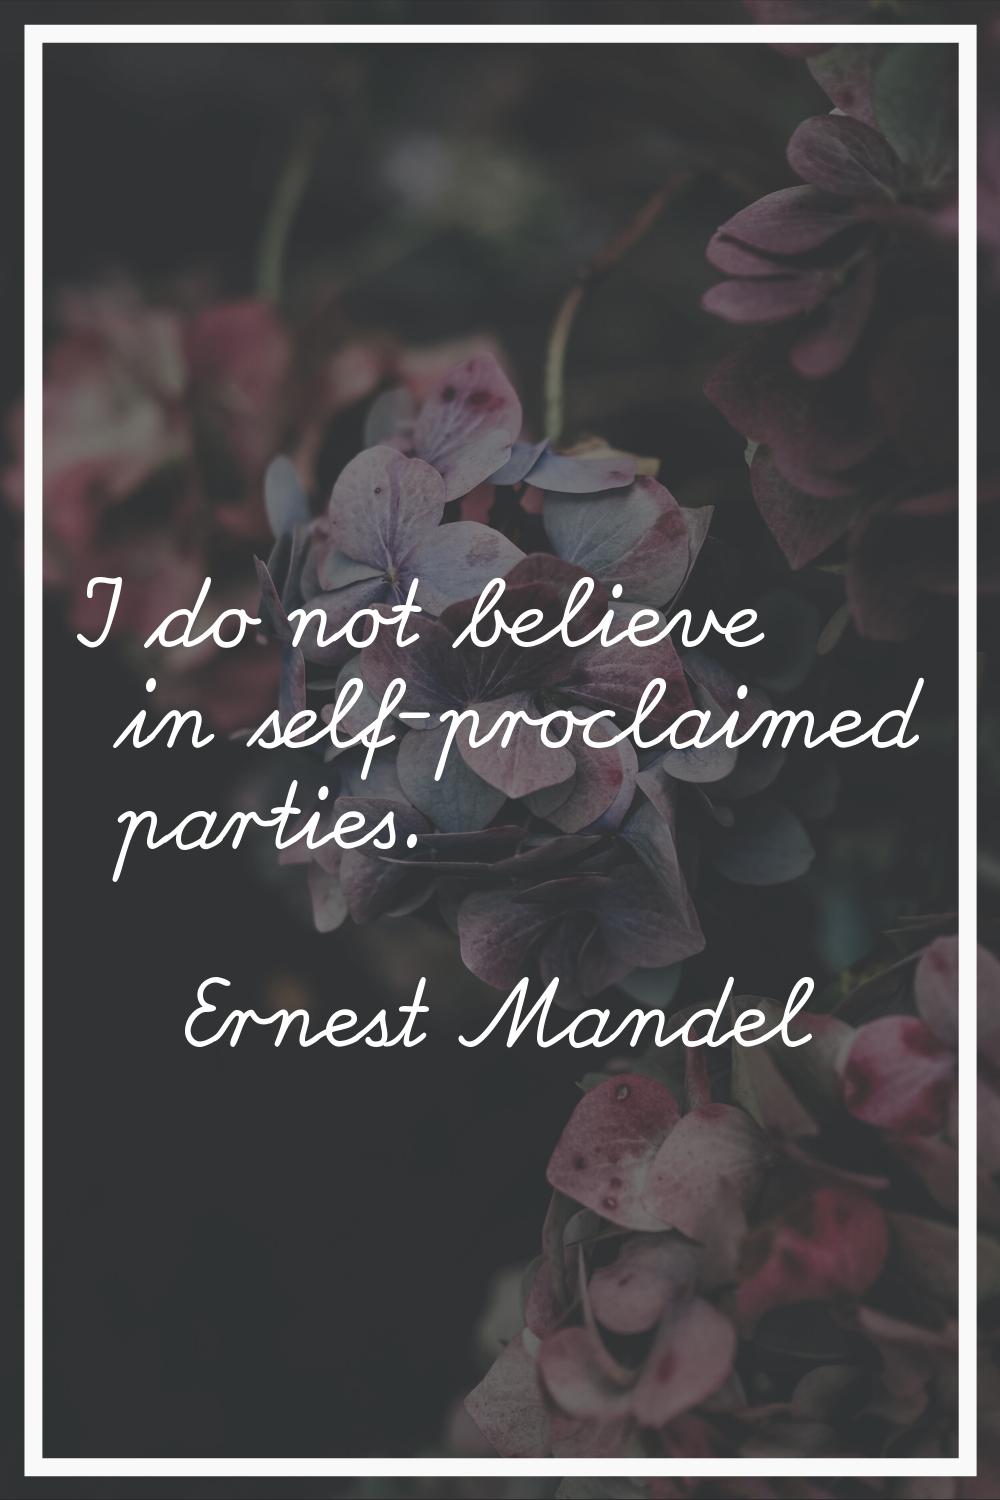 I do not believe in self-proclaimed parties.